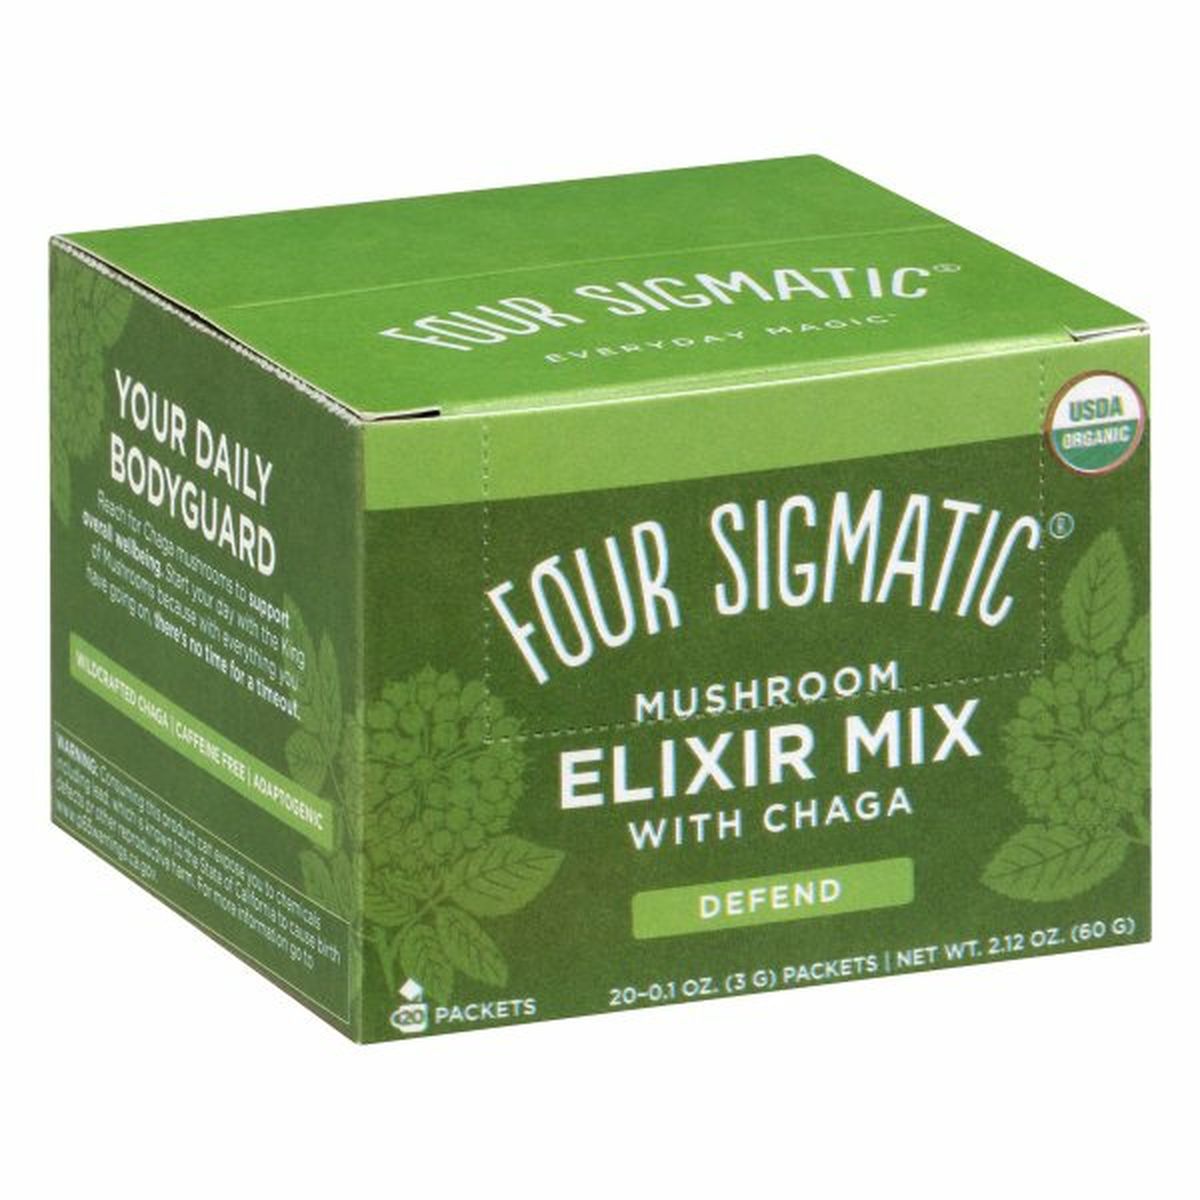 Calories in Four Sigmatic Elixir Mix, Mushroom, Defend, 20 Pack